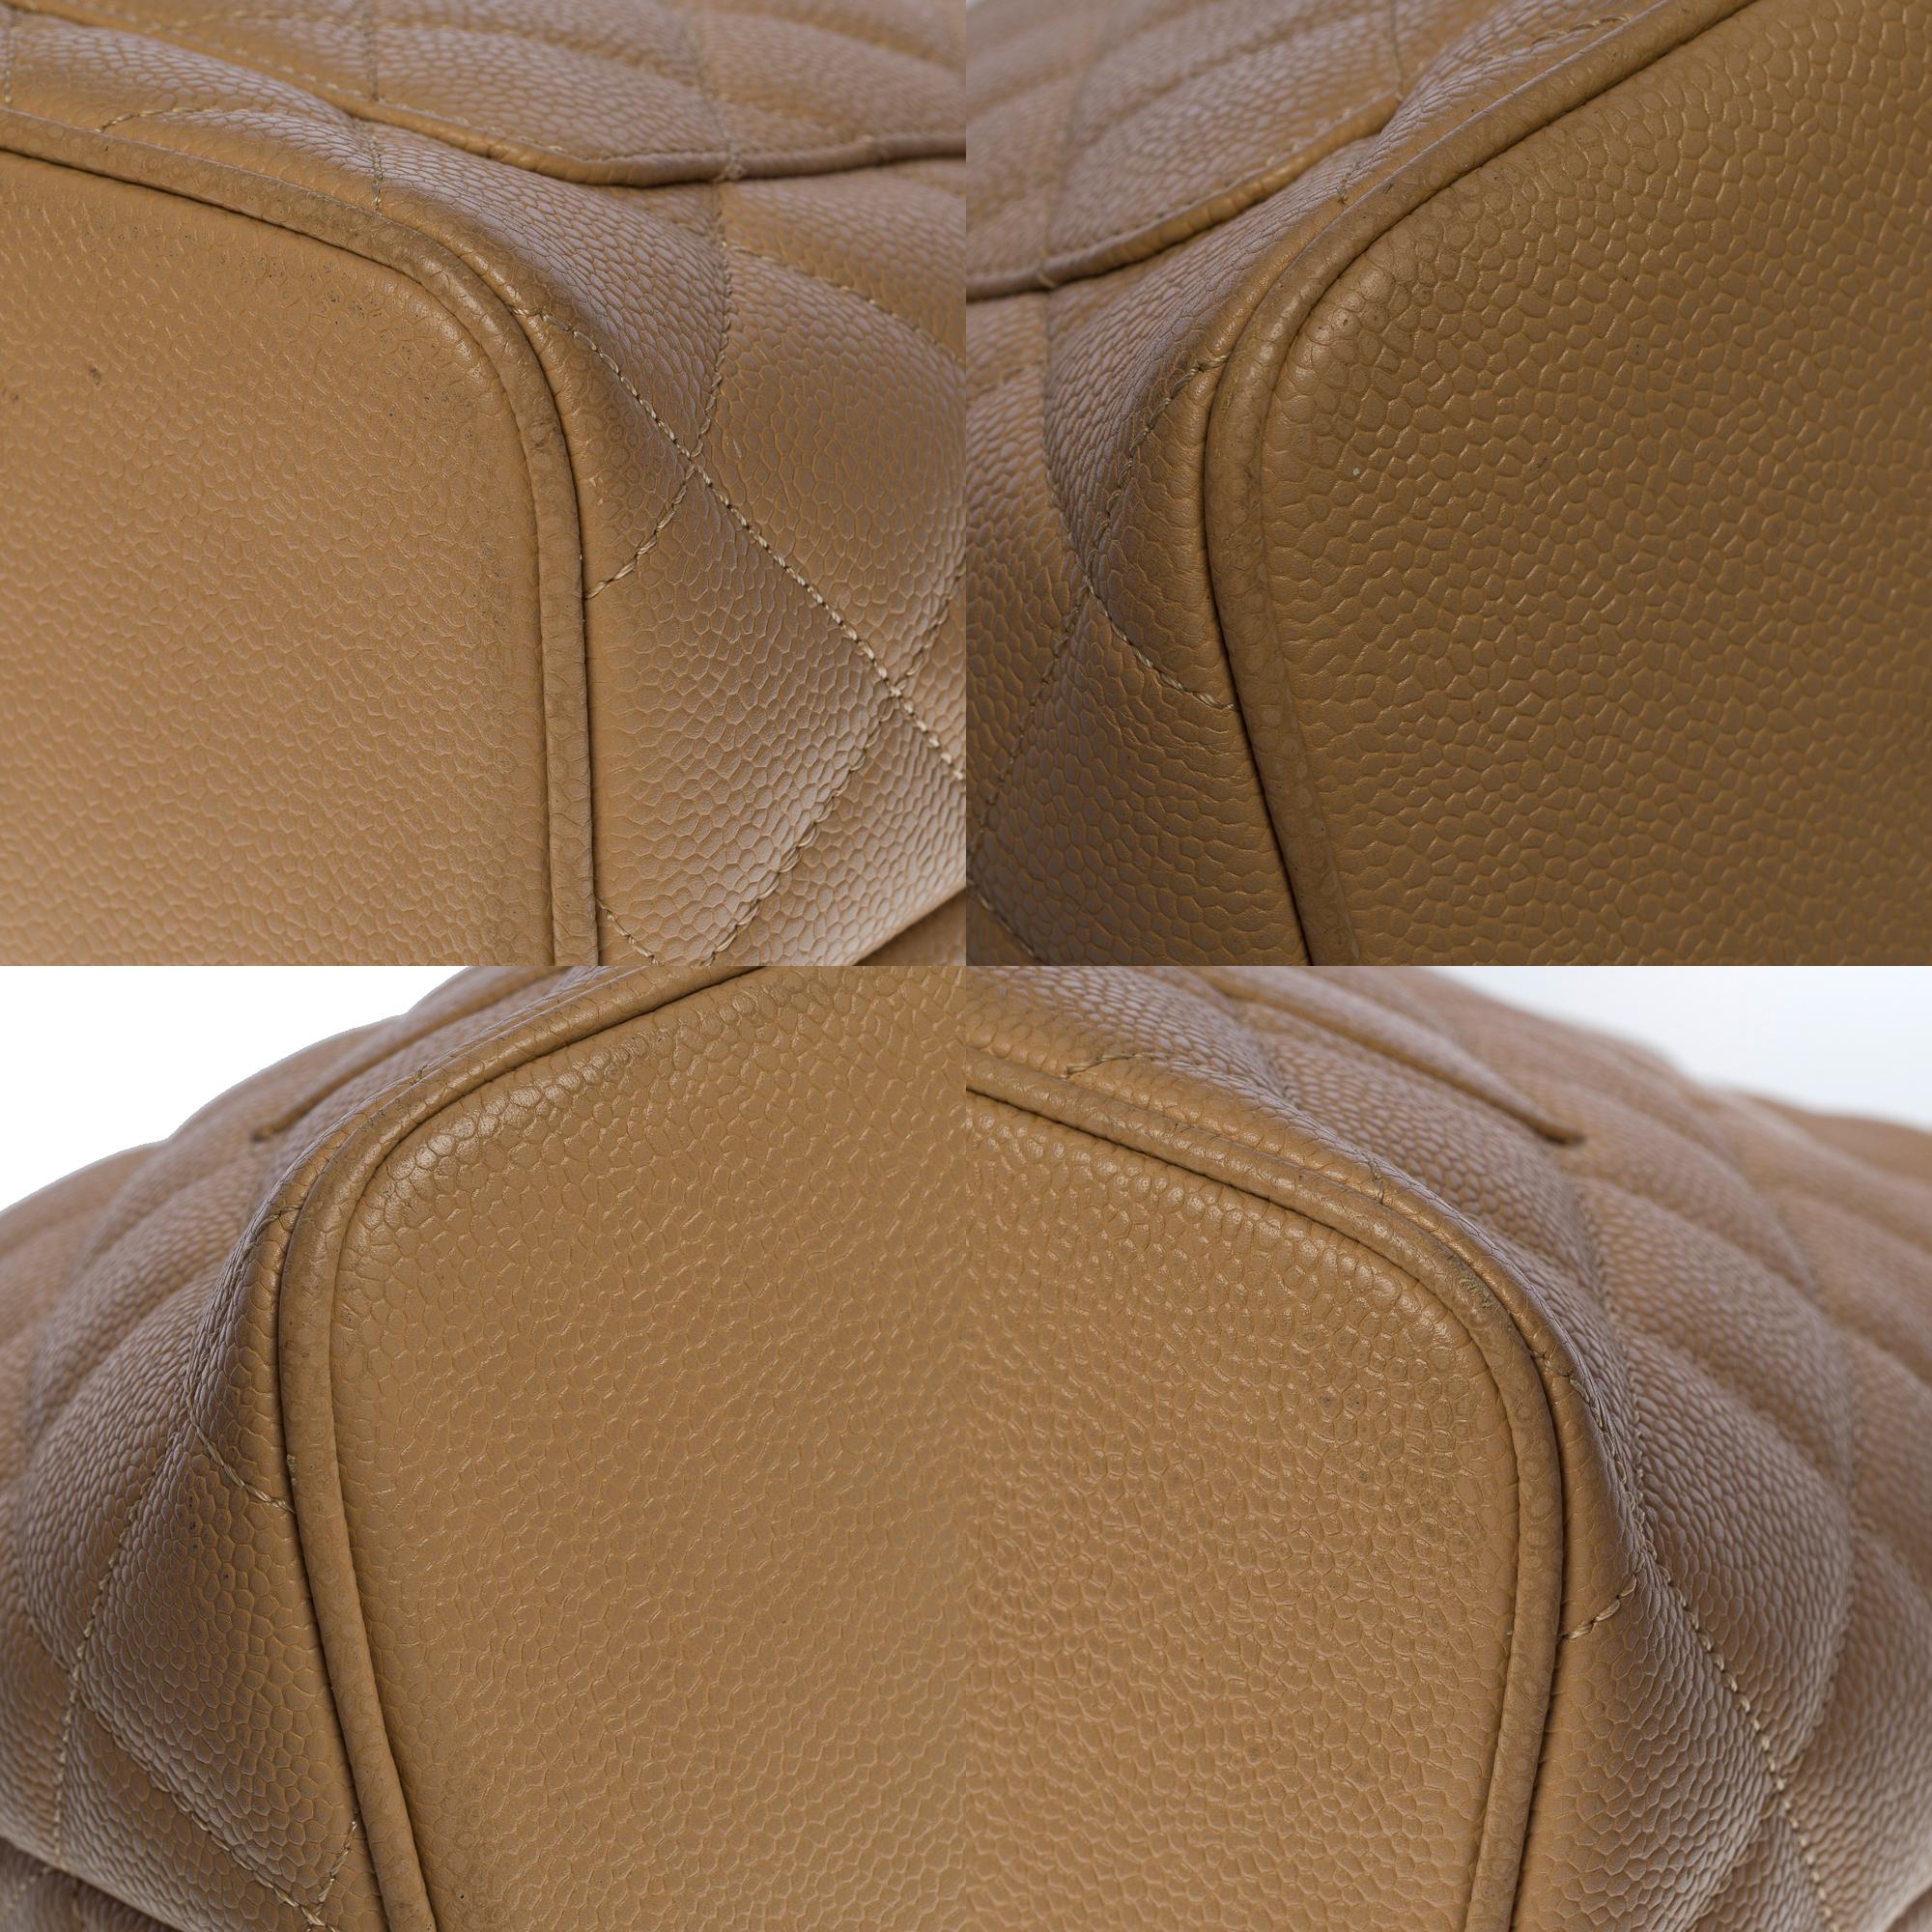  Chanel Médaillon Tote bag in beige caviar leather, GHW 4